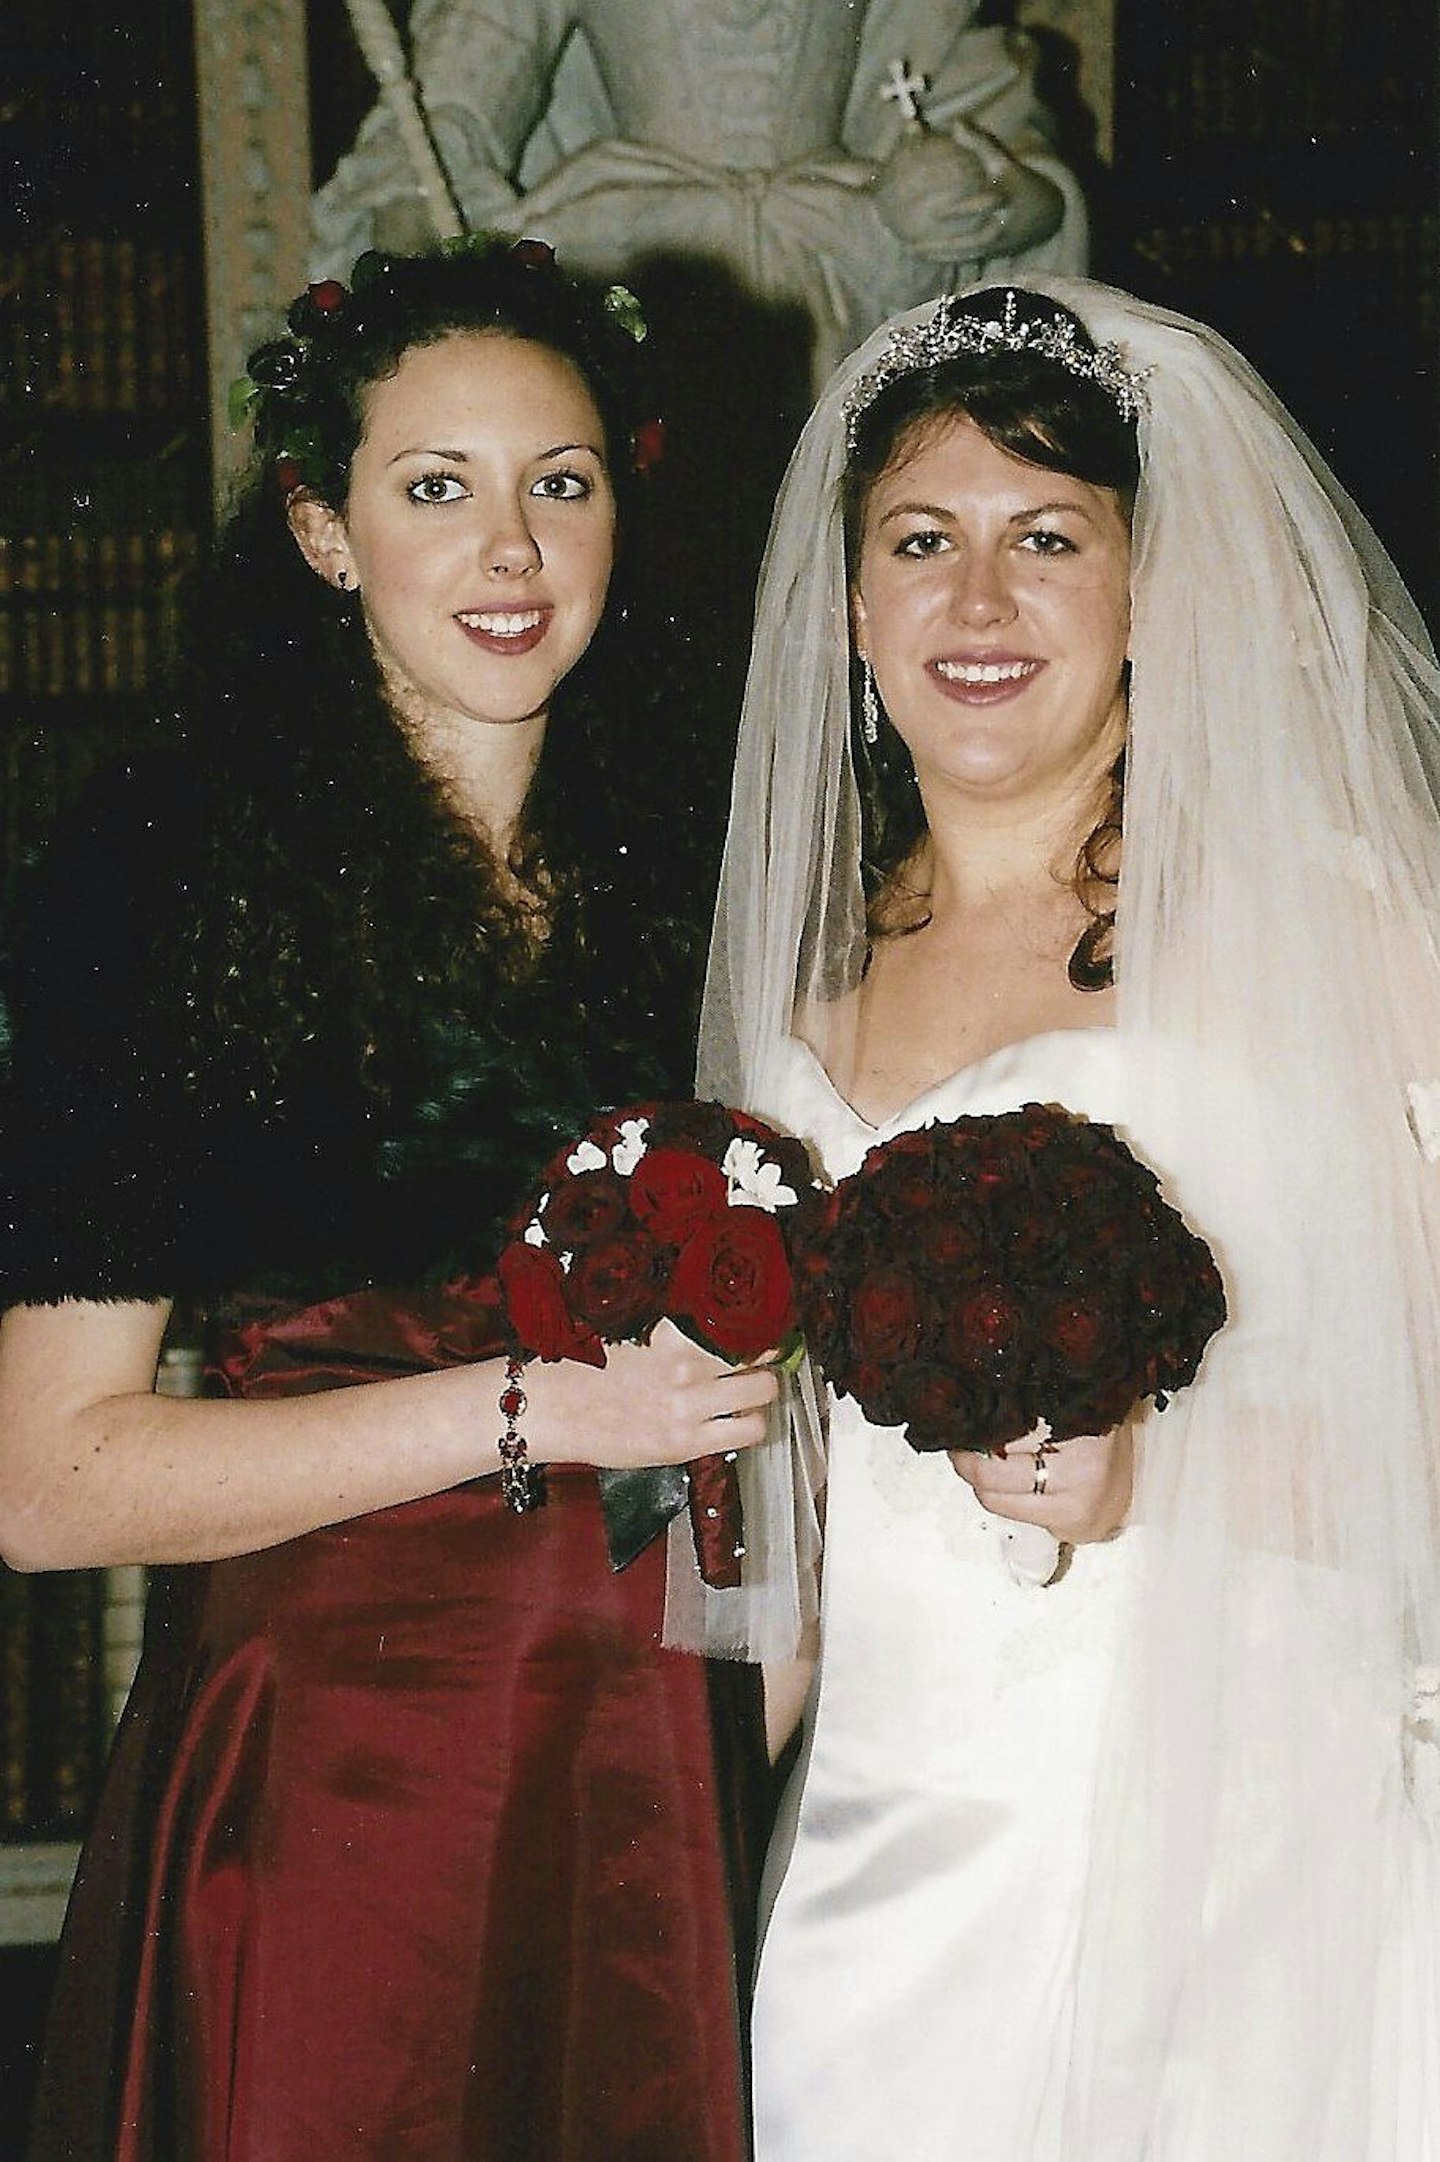 Jo and me on my wedding day